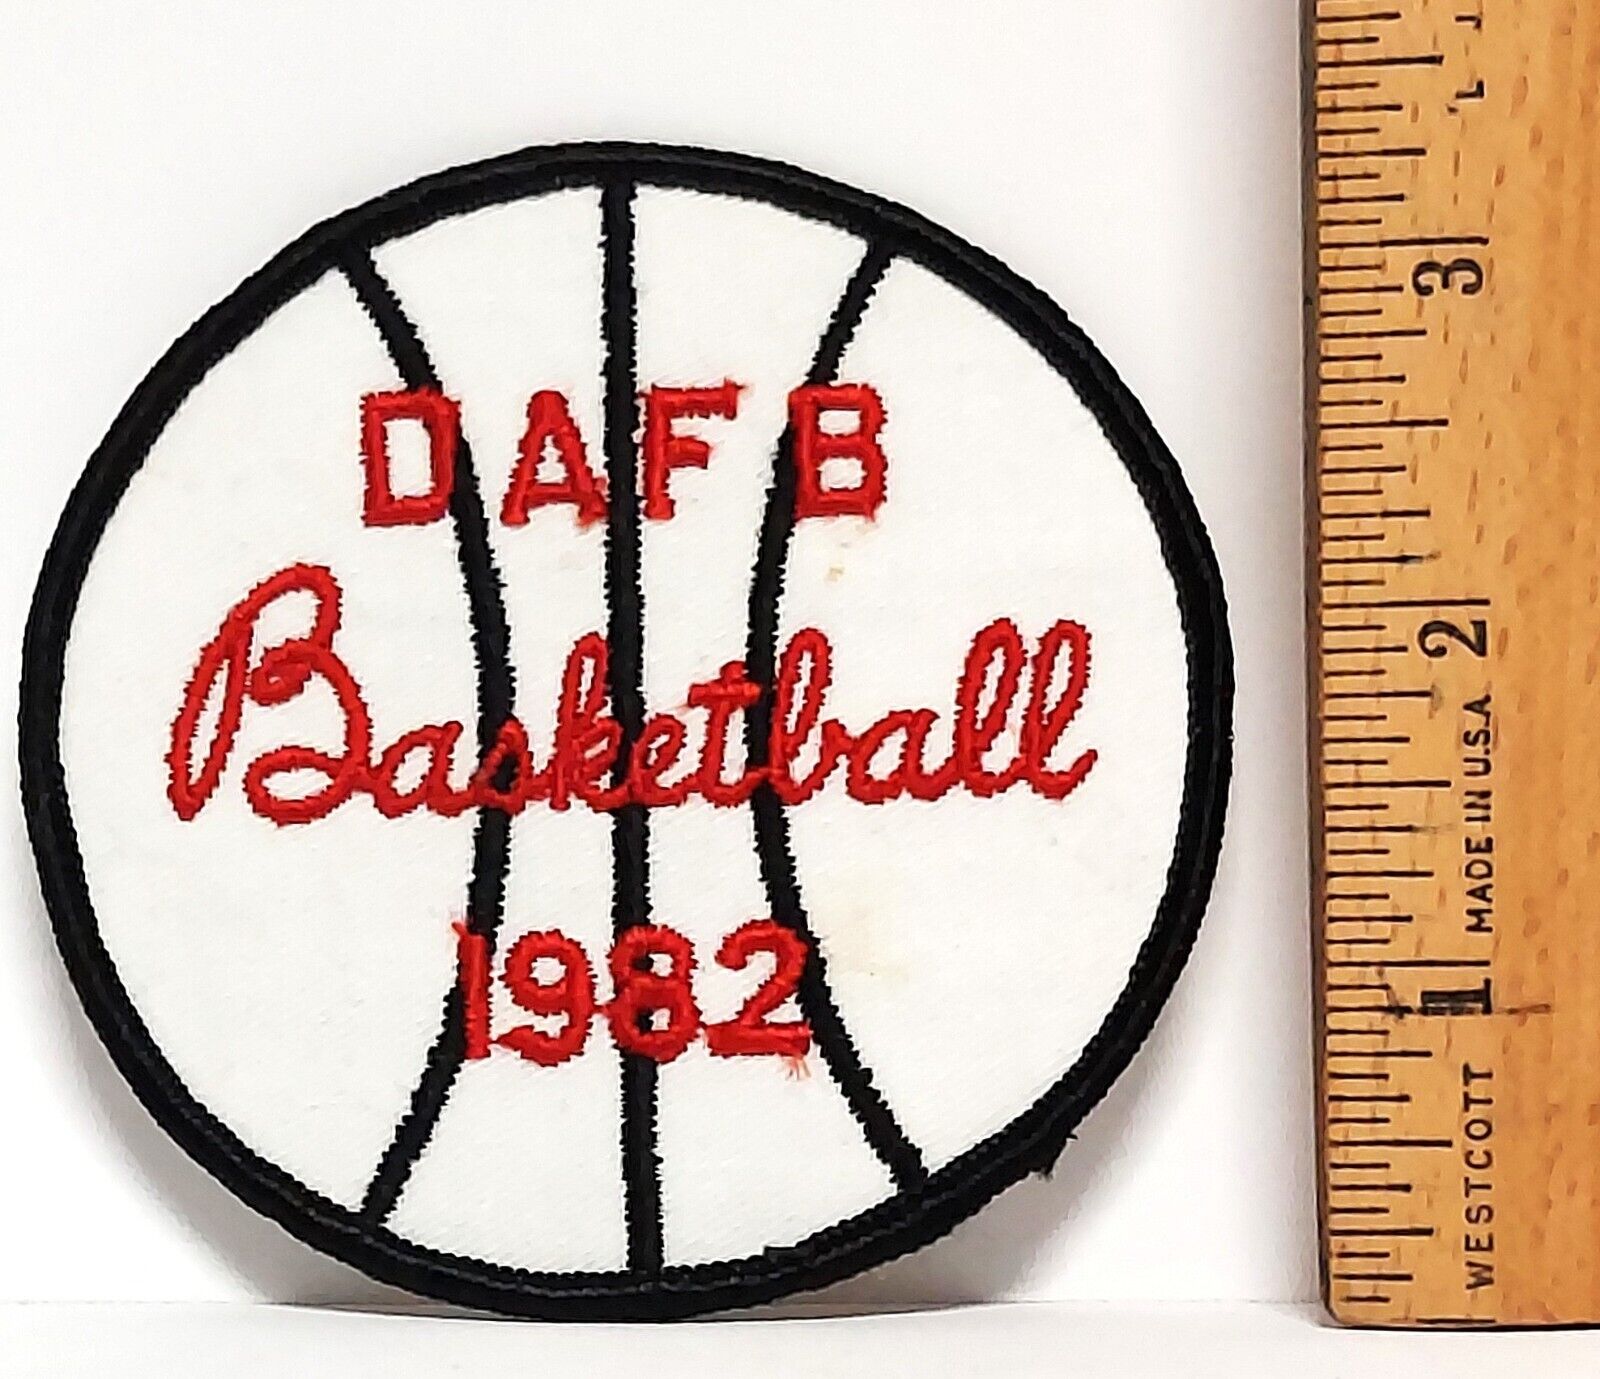 USAF Patch #071 - DAFB Basketball 1982 - Dover AFB DE - Rare Stateside MWR Patch